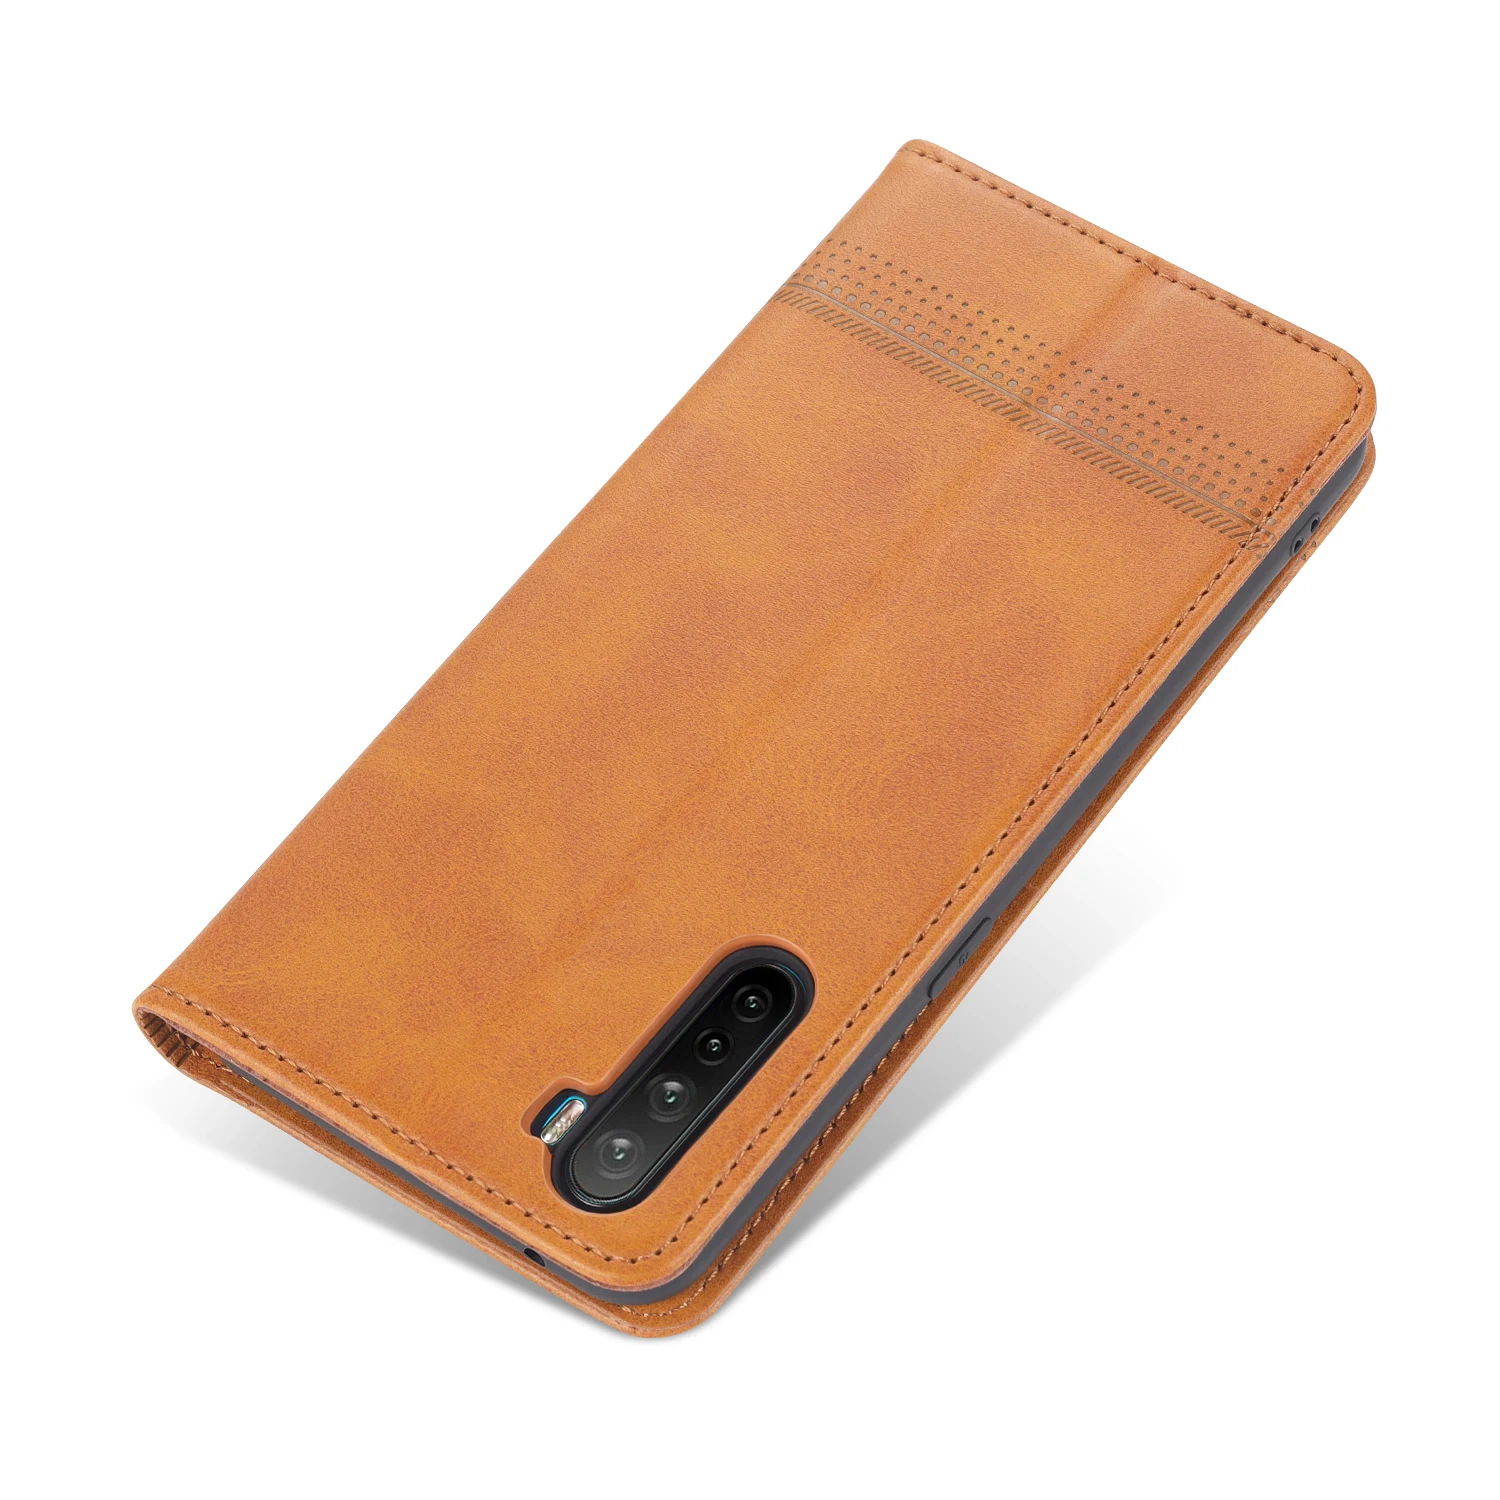 Deluxe Magnetic adsorption leather case for OPPO Reno 3 Global 4G / OPPO A91/ OPPO F15 Flip Cover Protective Case capa fundas